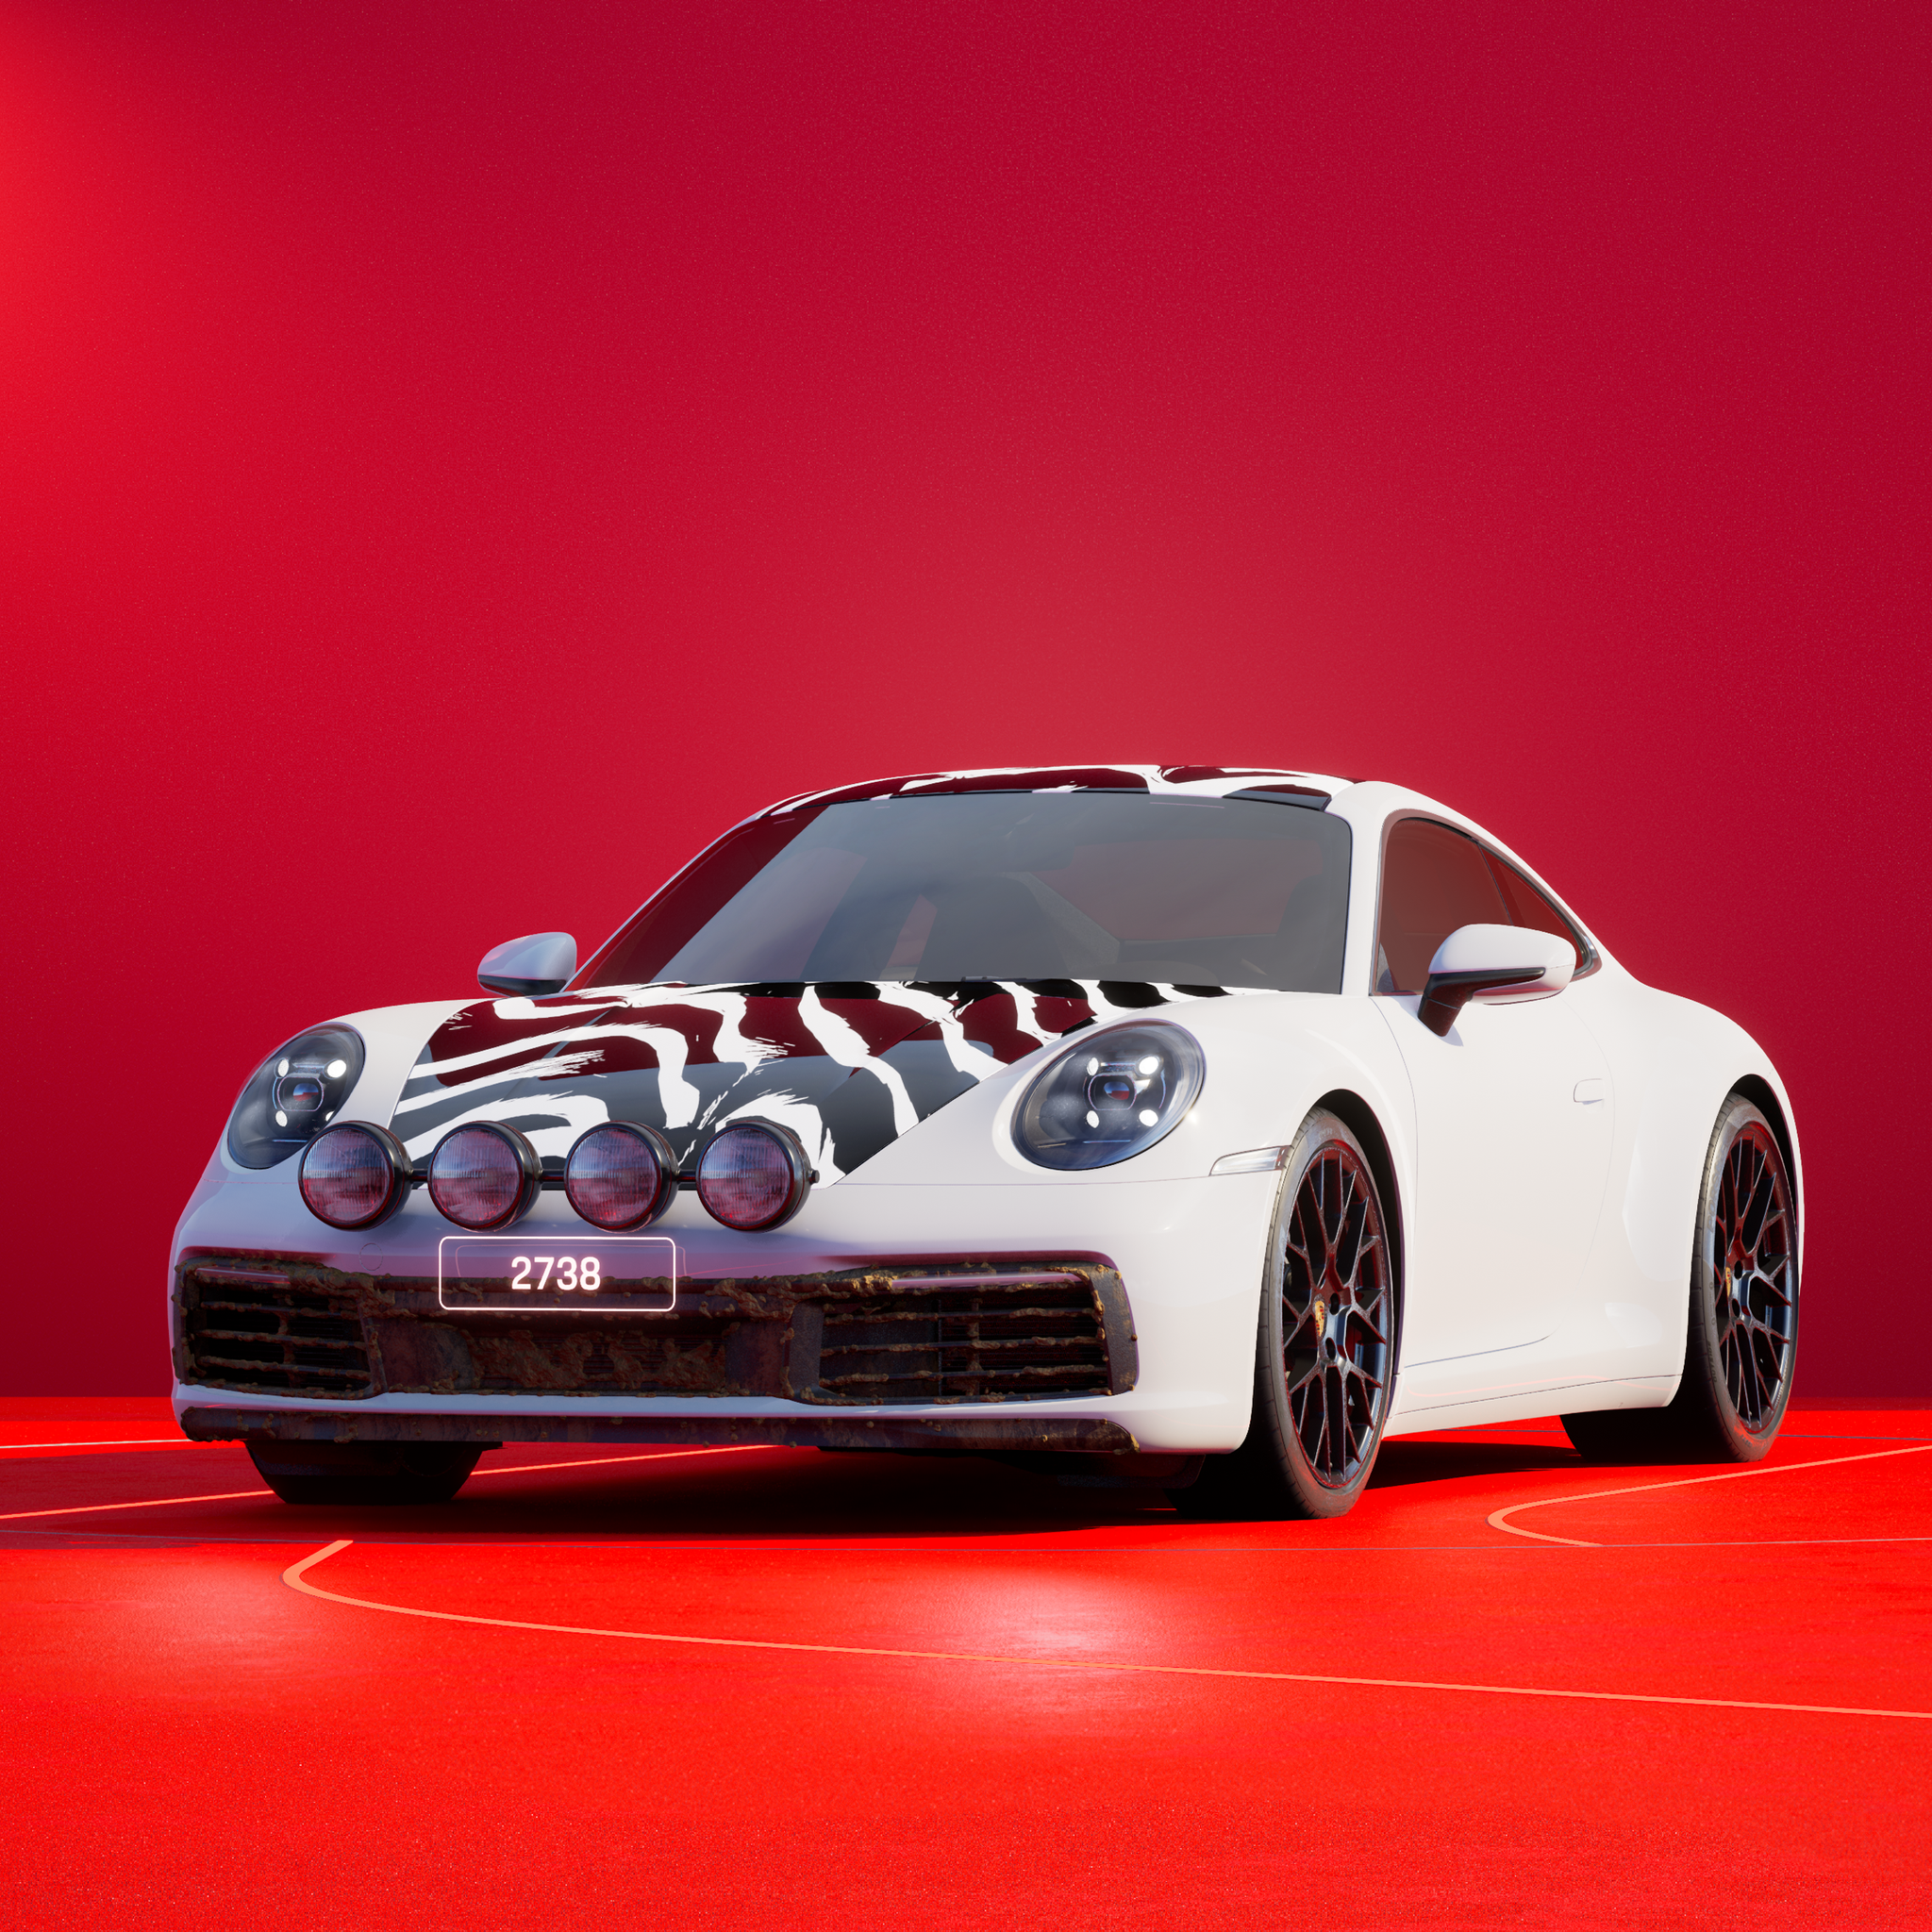 The PORSCHΞ 911 2738 image in phase